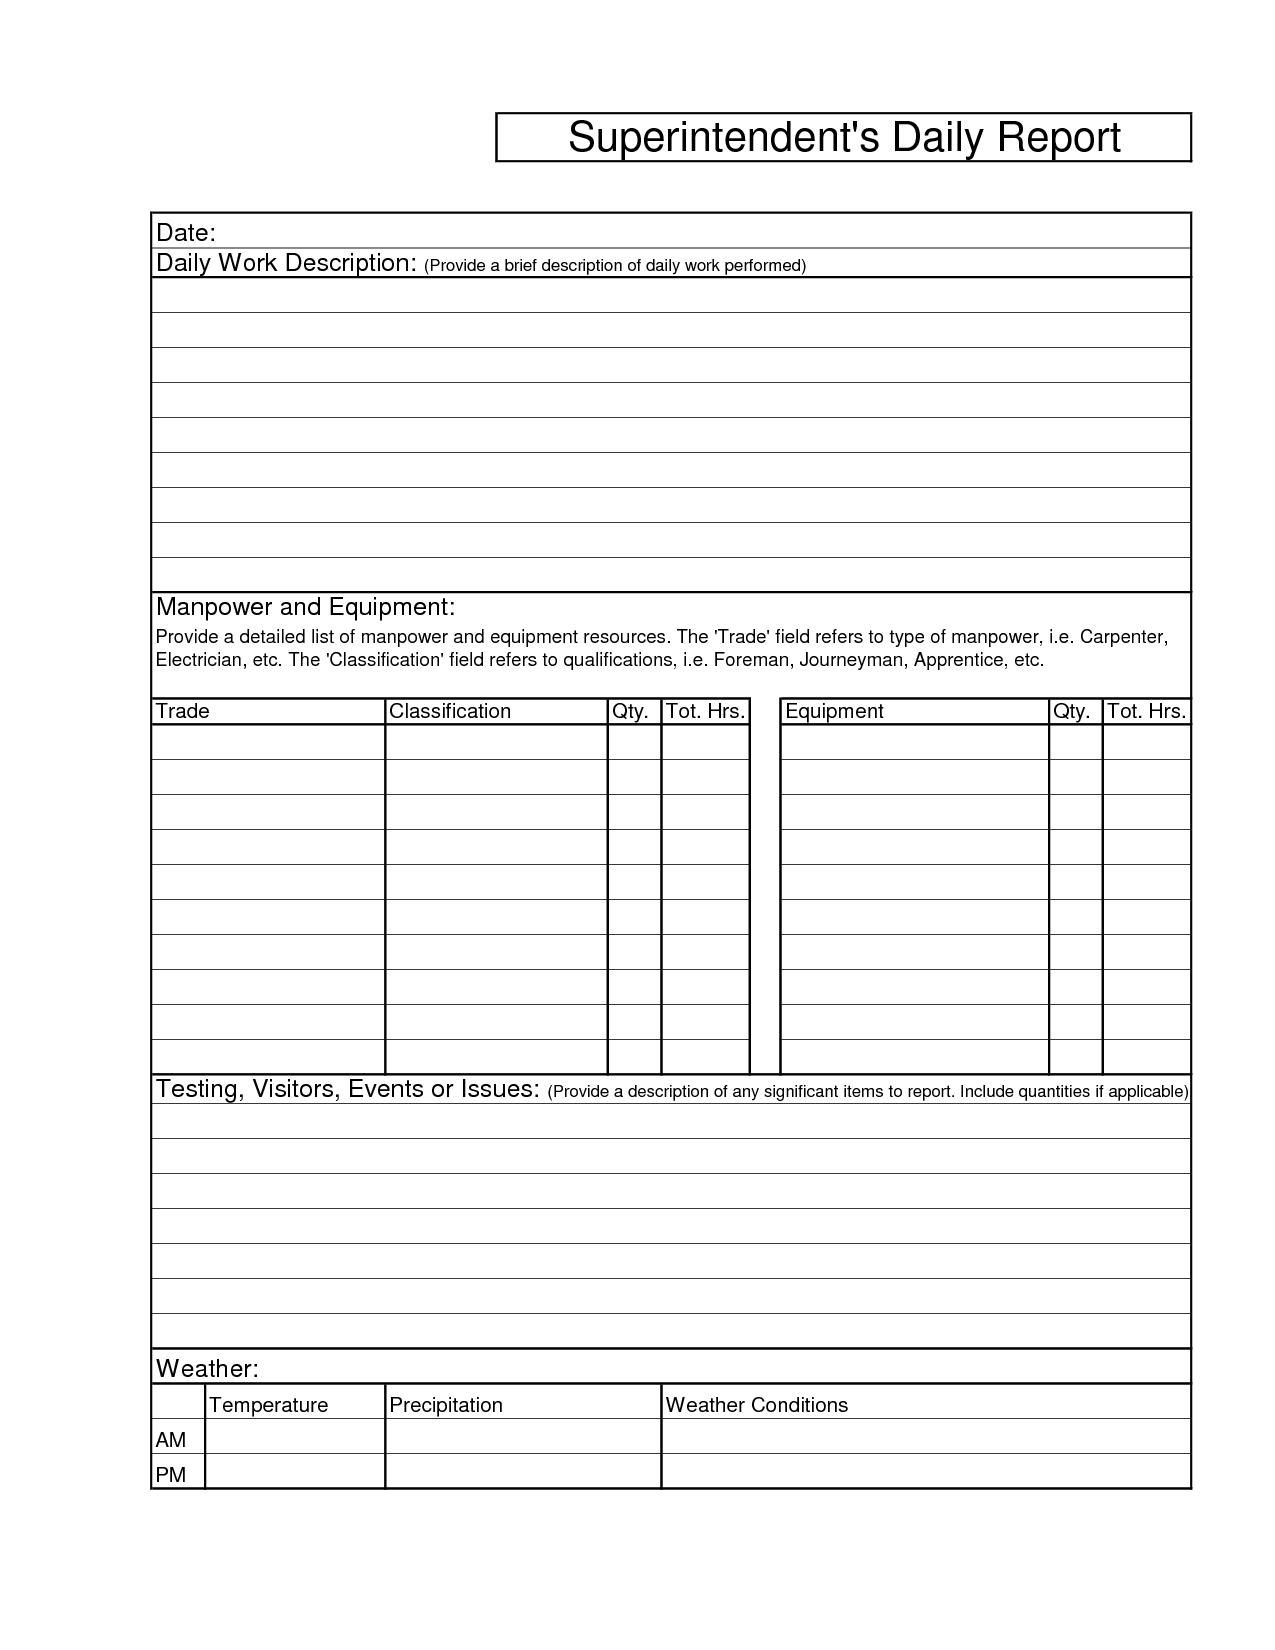 Printable Blank Superintendents Daily Report Sample And For Superintendent Daily Report Template